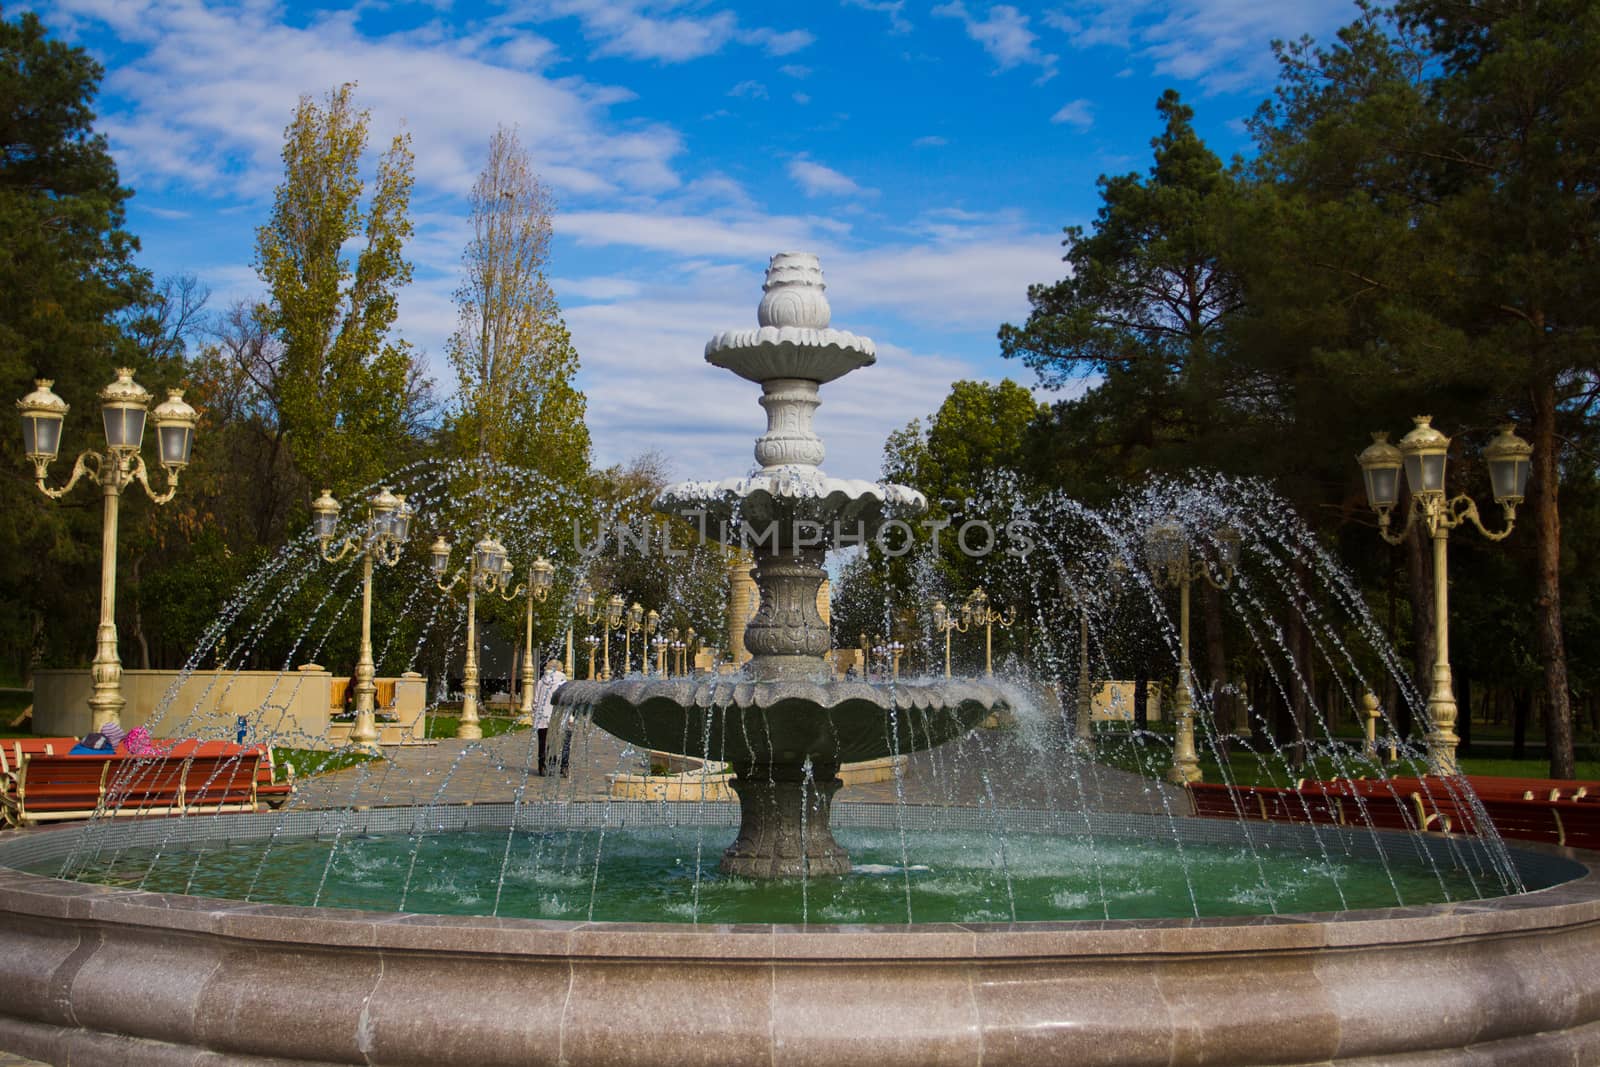 The fountain on the background of blue sky. Spring in city park